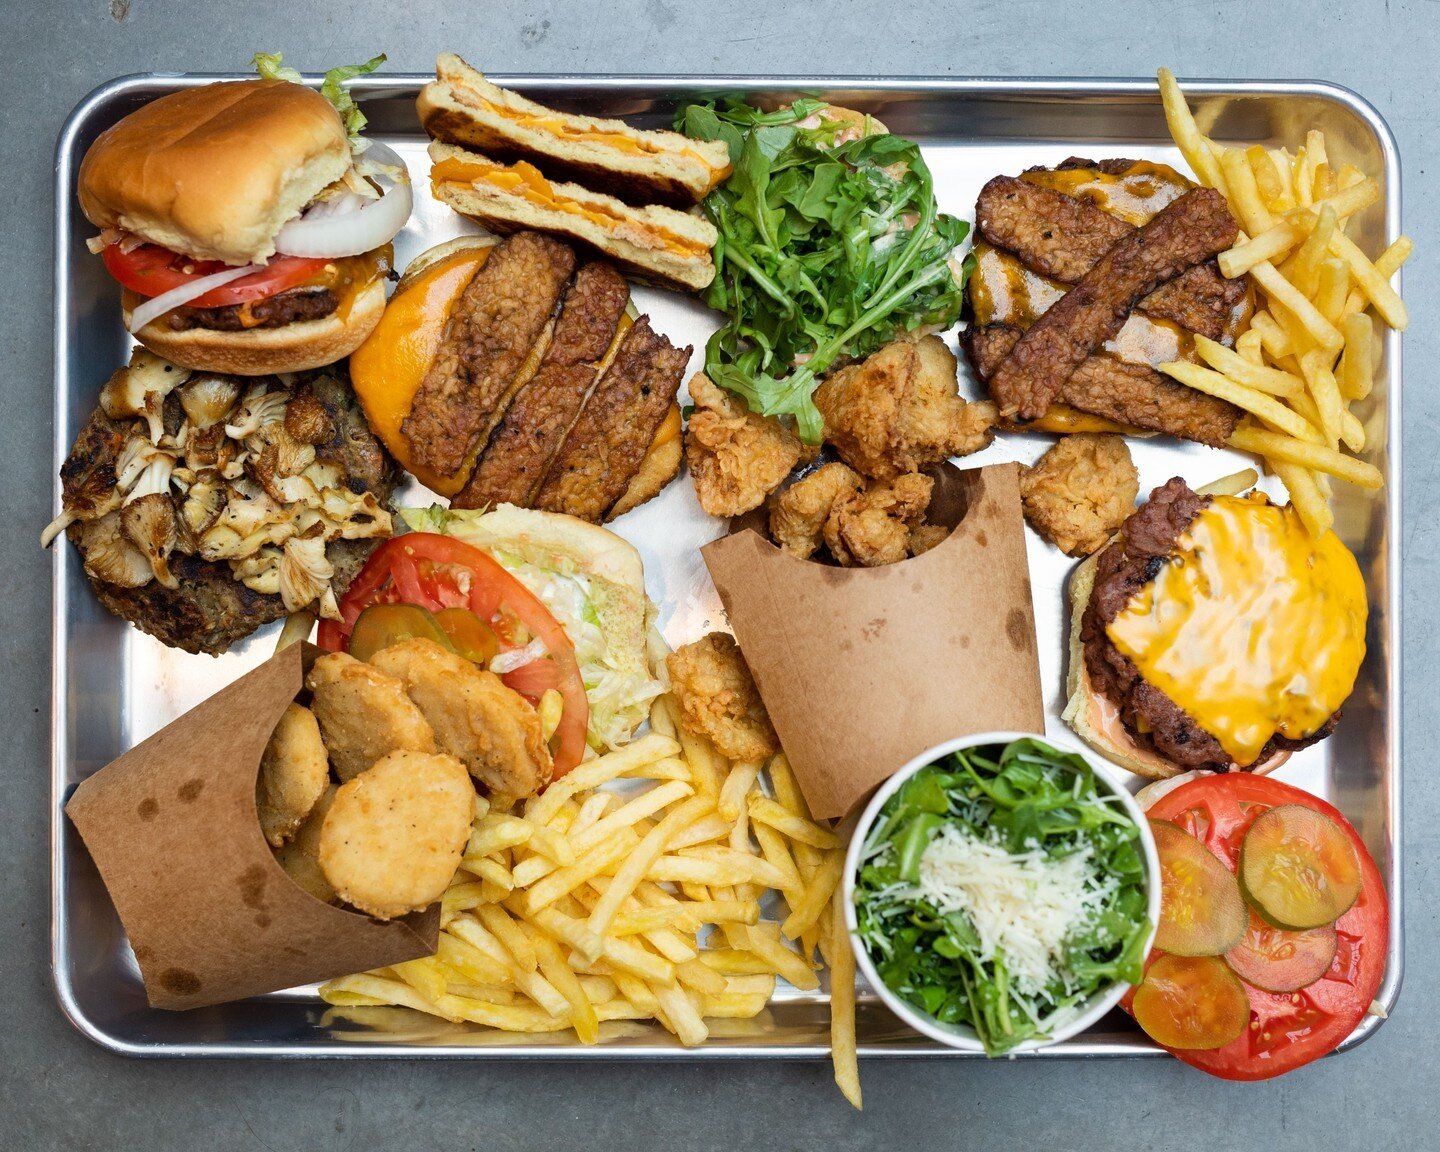 Everything you see on this tray is 💯 vegan, which is interesting because, for *harmless* food, it sure does slap hard!